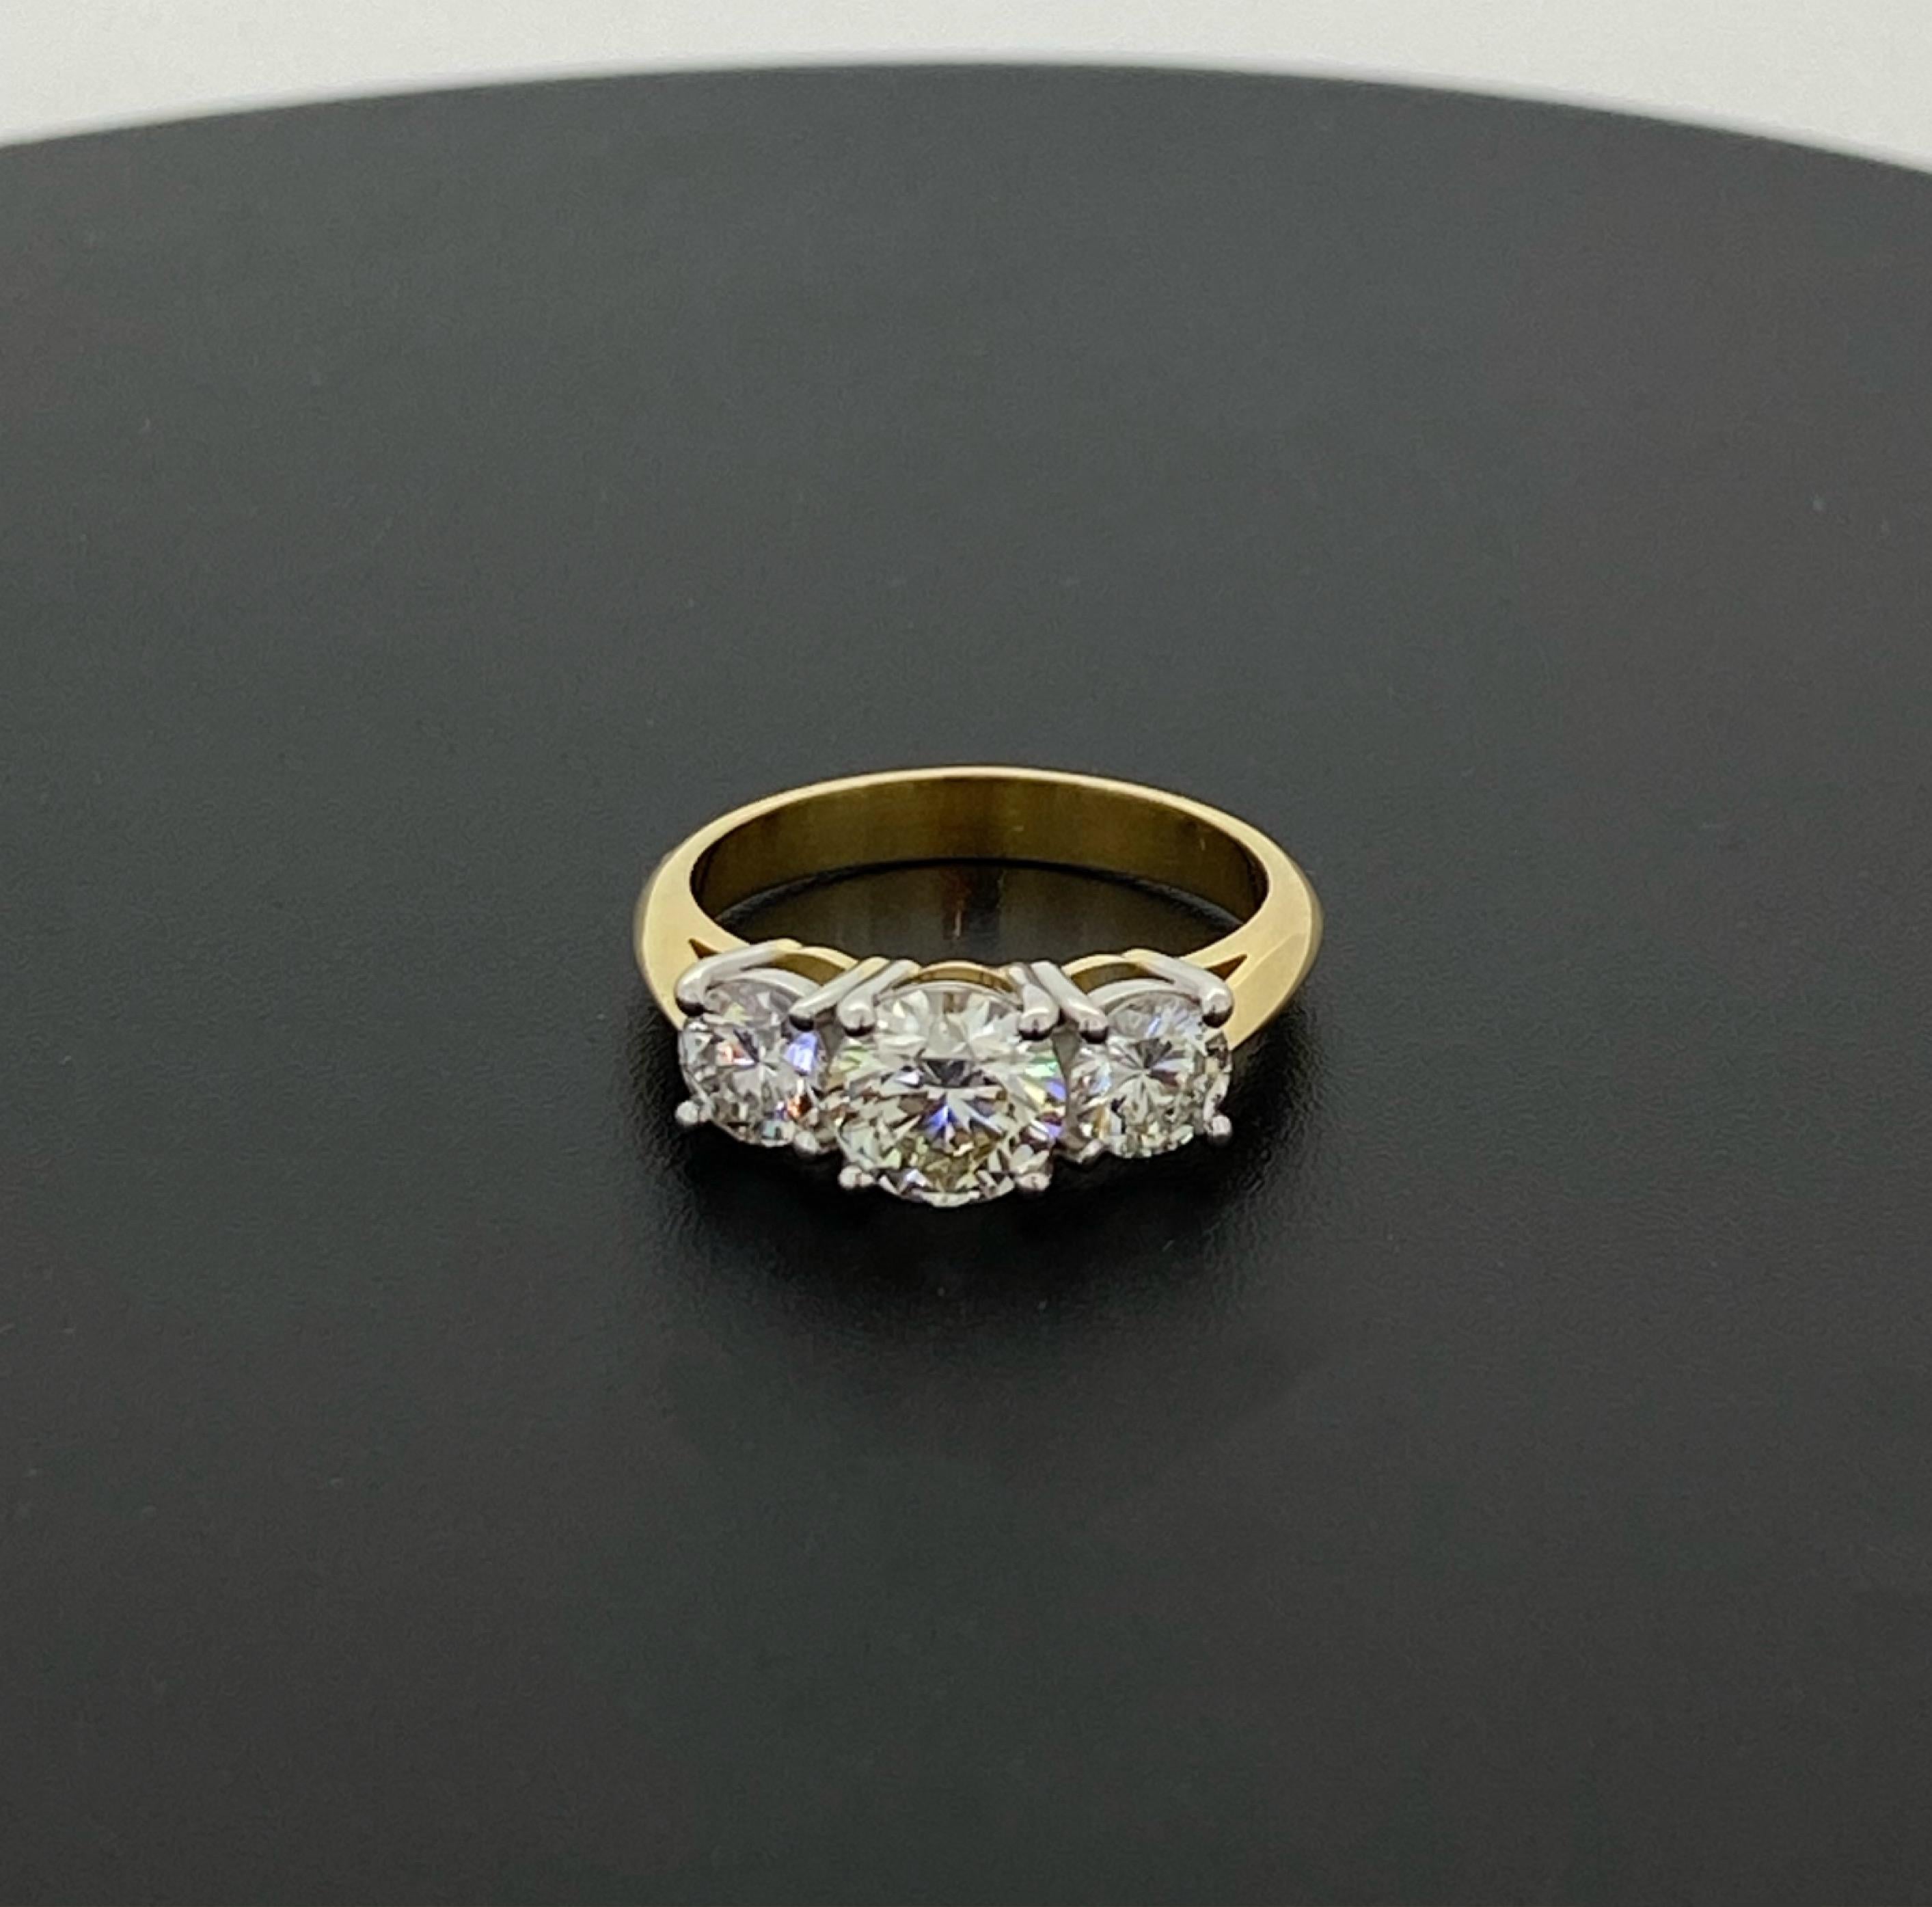 Modern Superb 2.05ct 3-Stone Diamond Ring in 18K Gold. Center stone: 1.05ct, Ideal Cut. For Sale